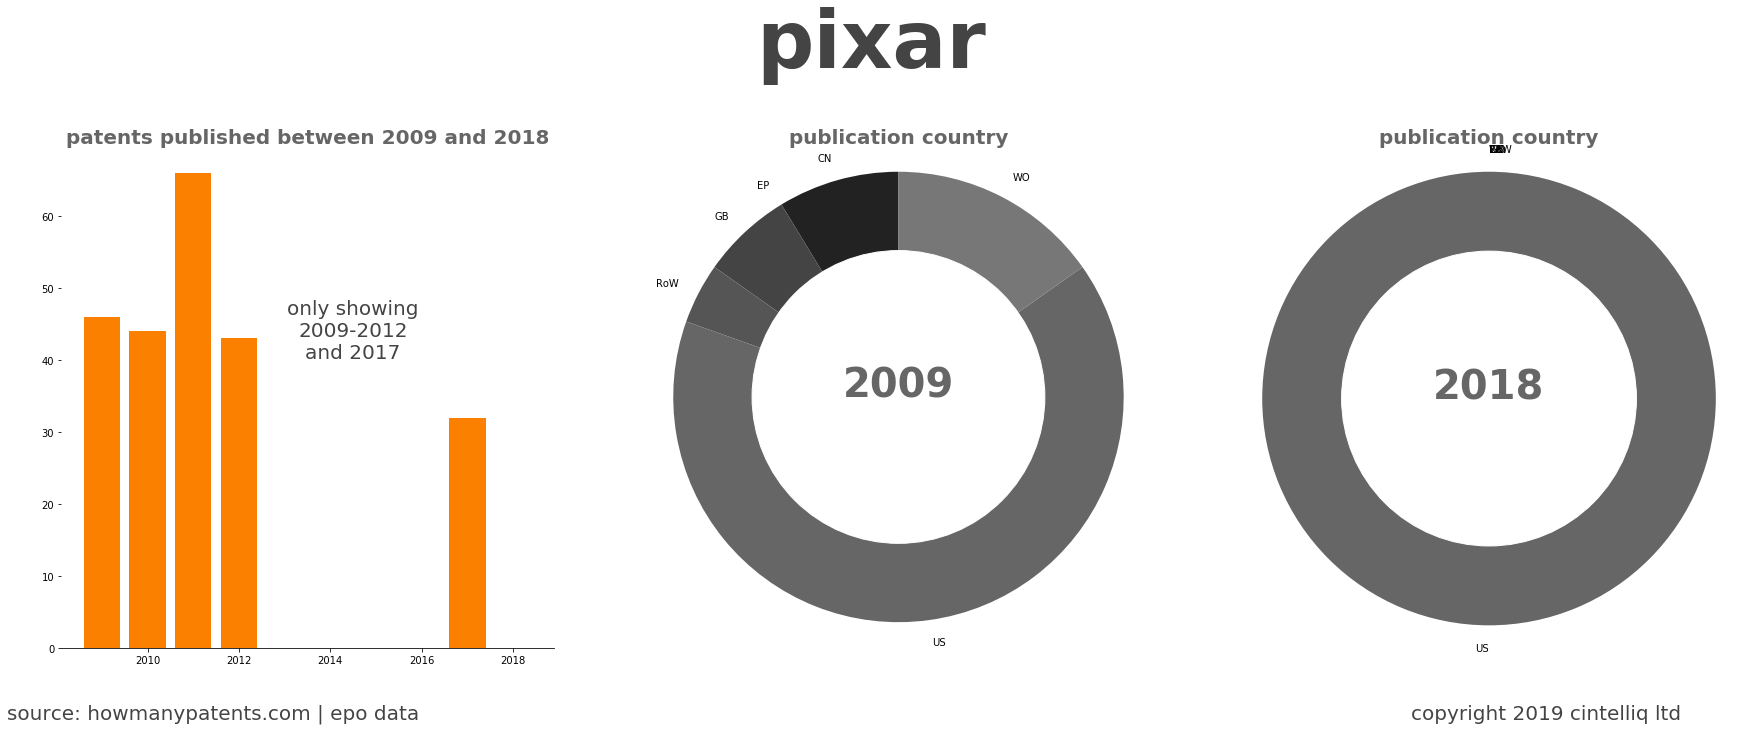 summary of patents for Pixar